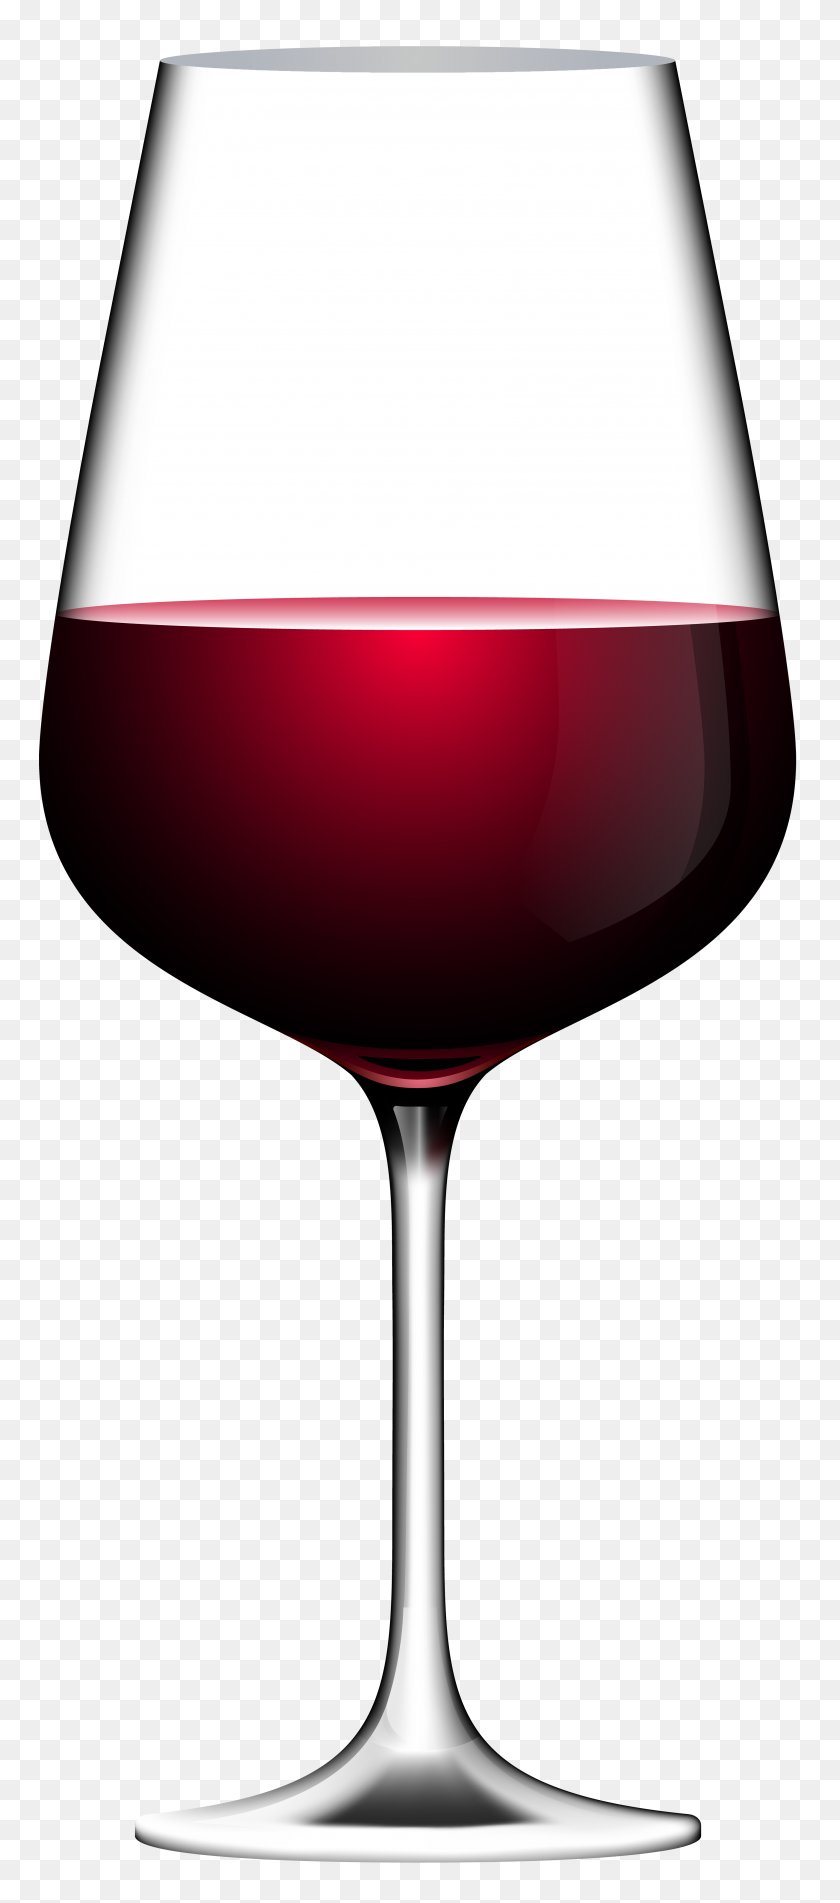 3384x8000 Red Wine Glass Transparent Clip Art - Red Wine Glass Clipart